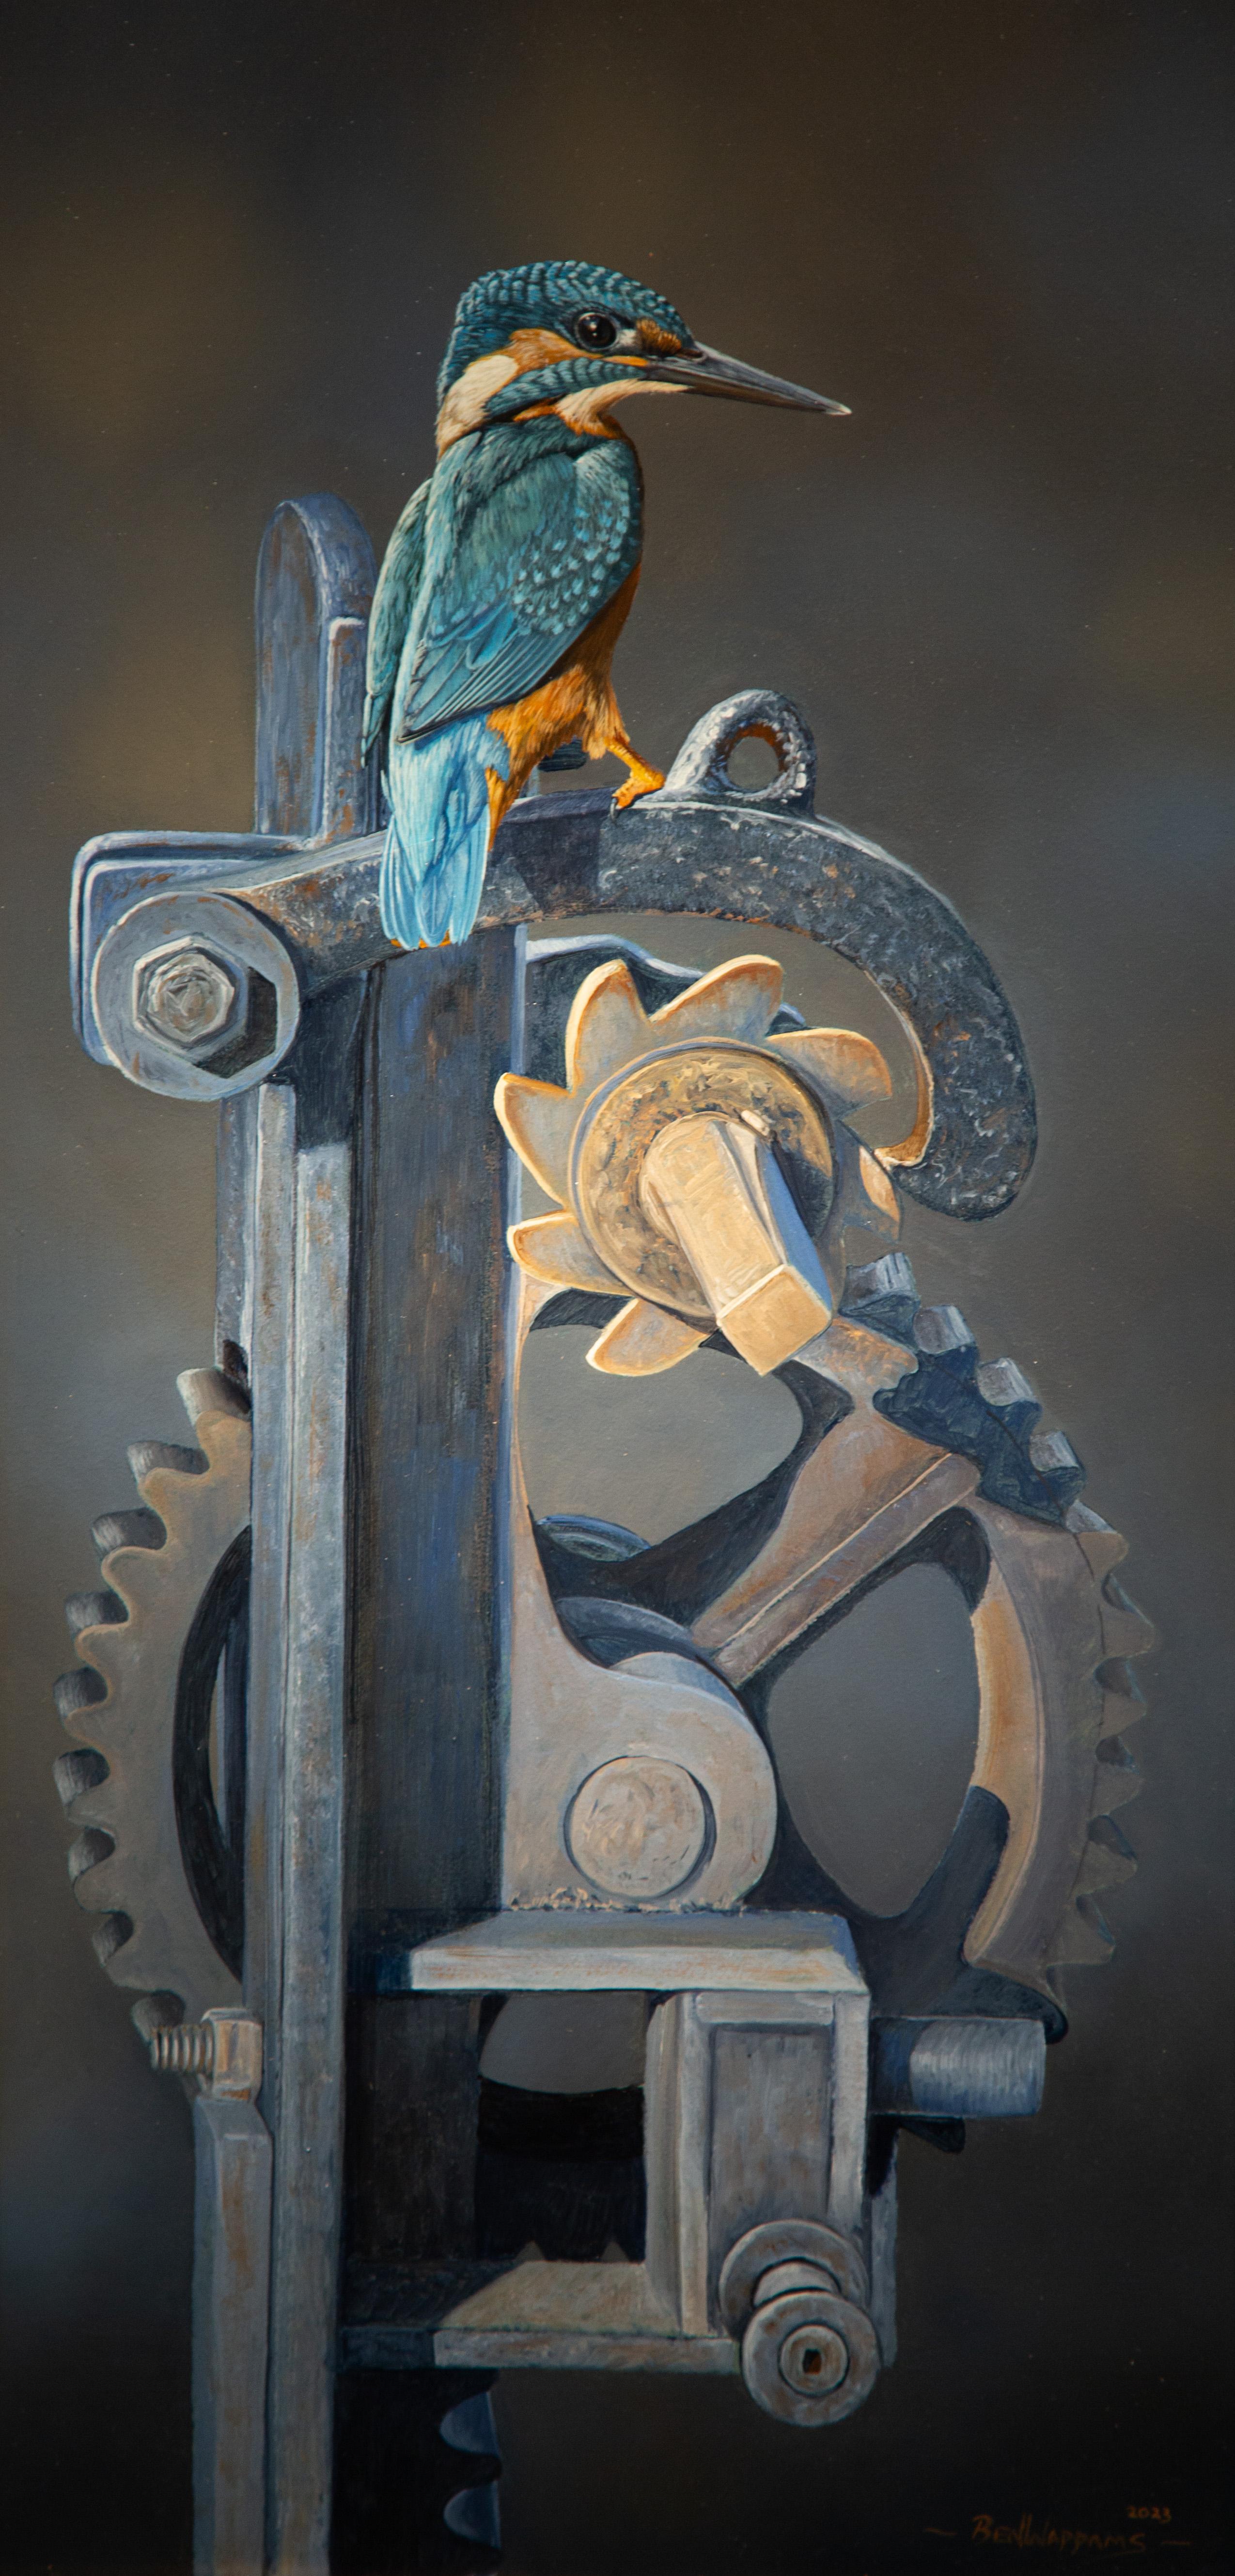 Ben Waddams Animal Painting - 'Kingfisher' Photorealist painting of a small blue bird on a lock gate, vivid